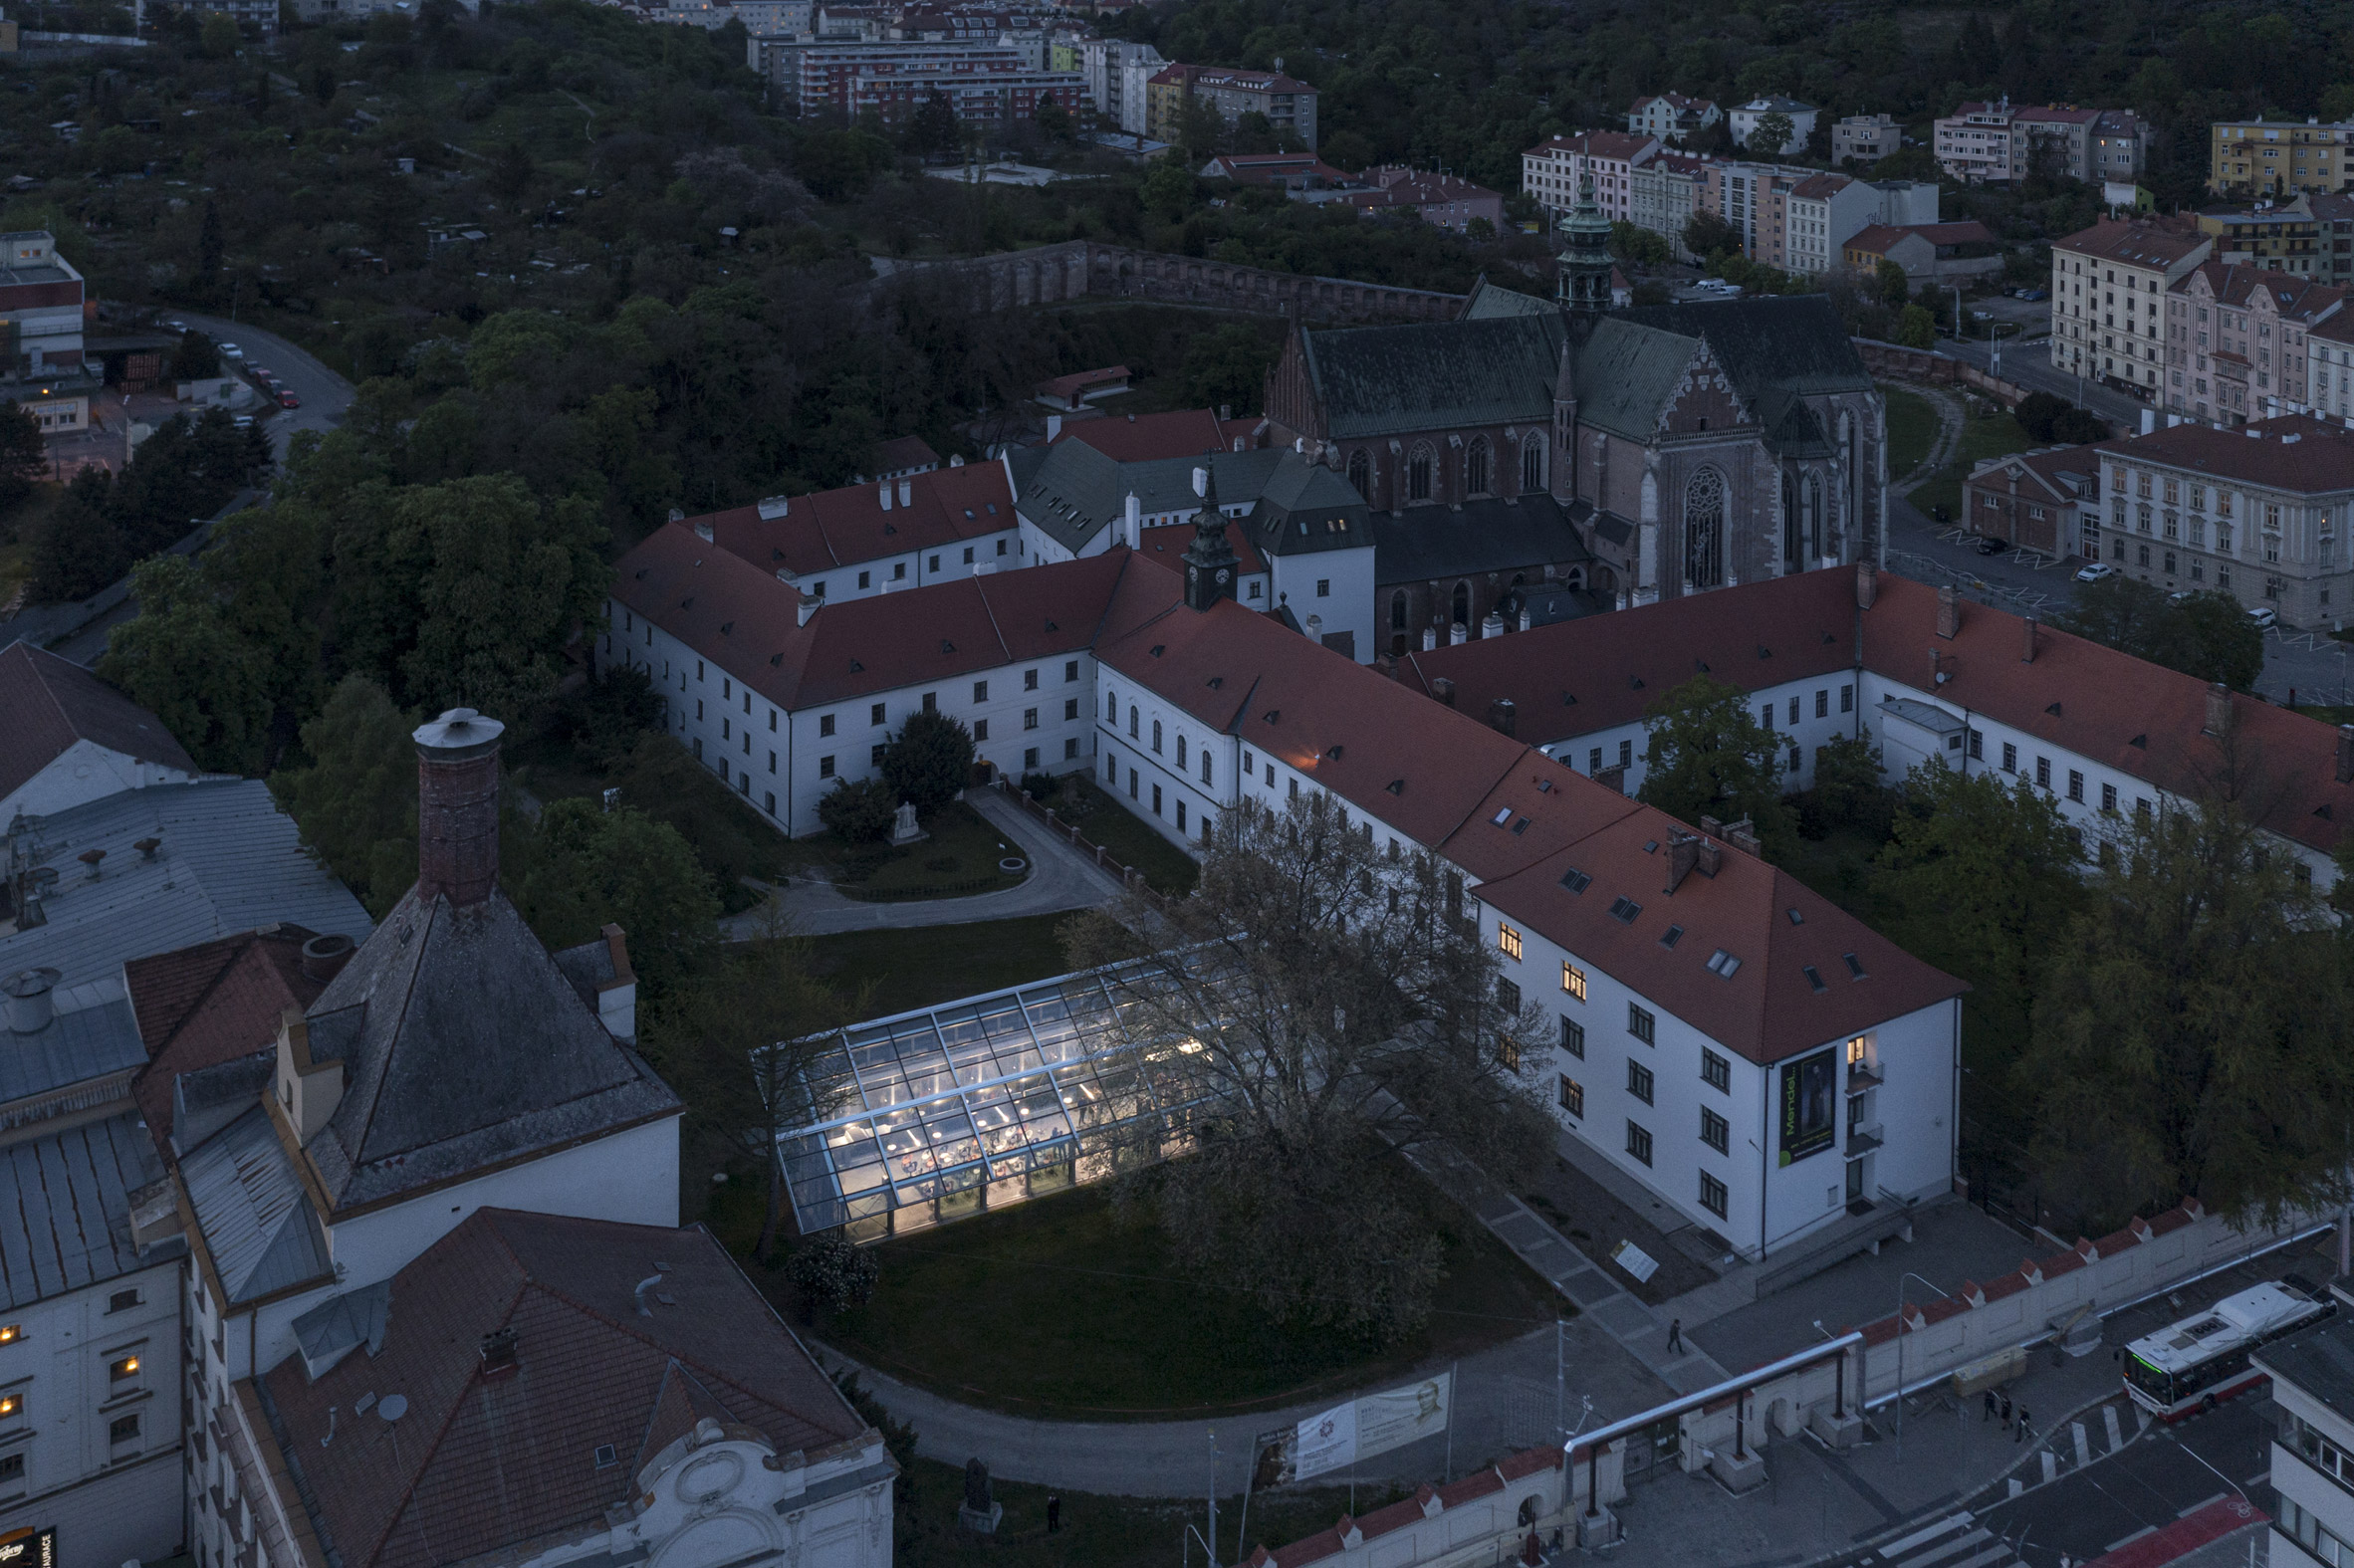 Aerial image of St Augustin's Abbey in Brno